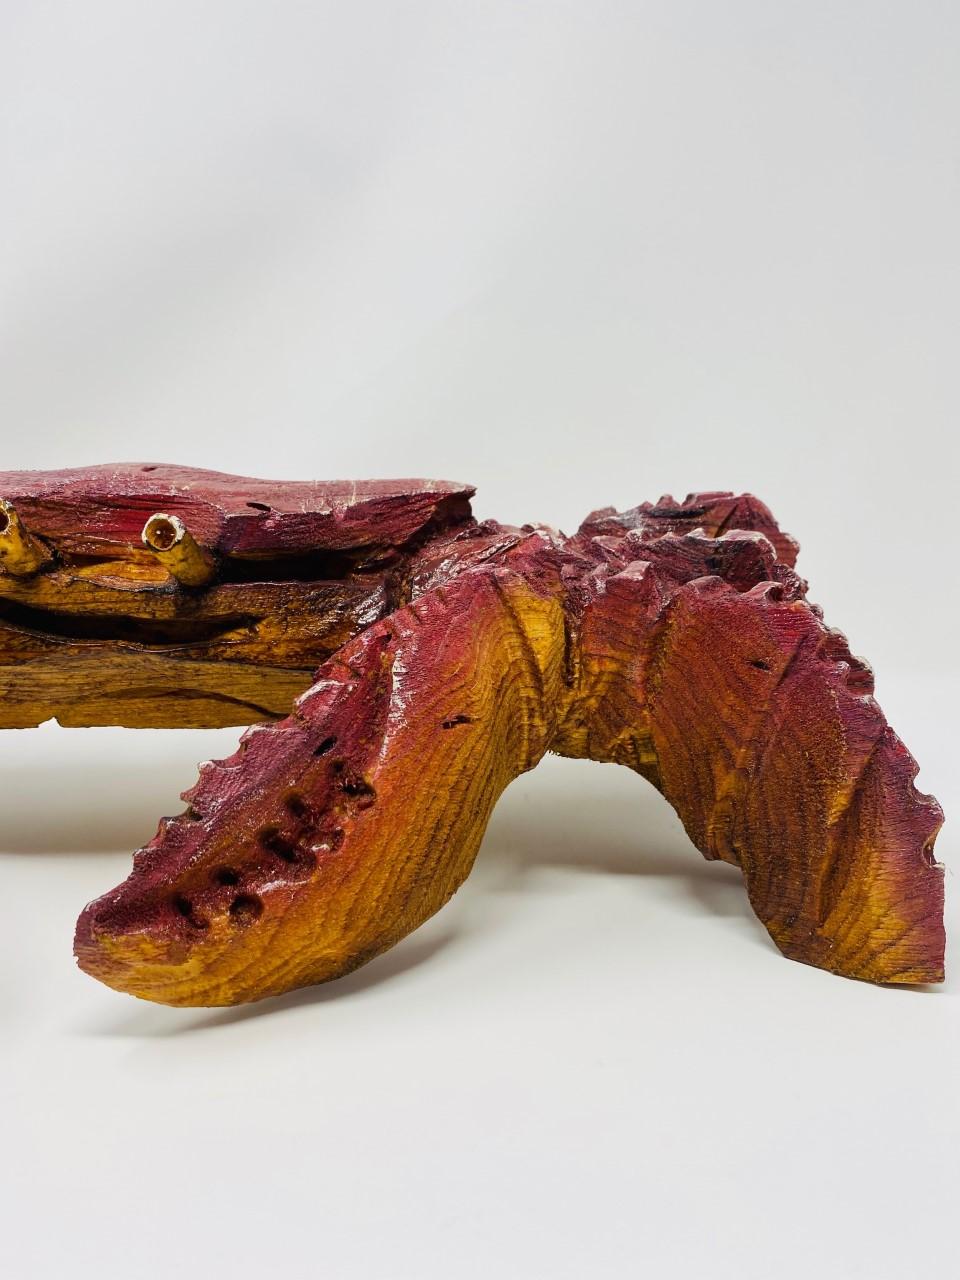 Beautiful rendered, carved wood giant crab sculpture. This piece is both striking and beautiful. Almost lifelike, a single piece of wood has been meticulously carved to resemble this sea creature. The sculpted carving along with the wood texture